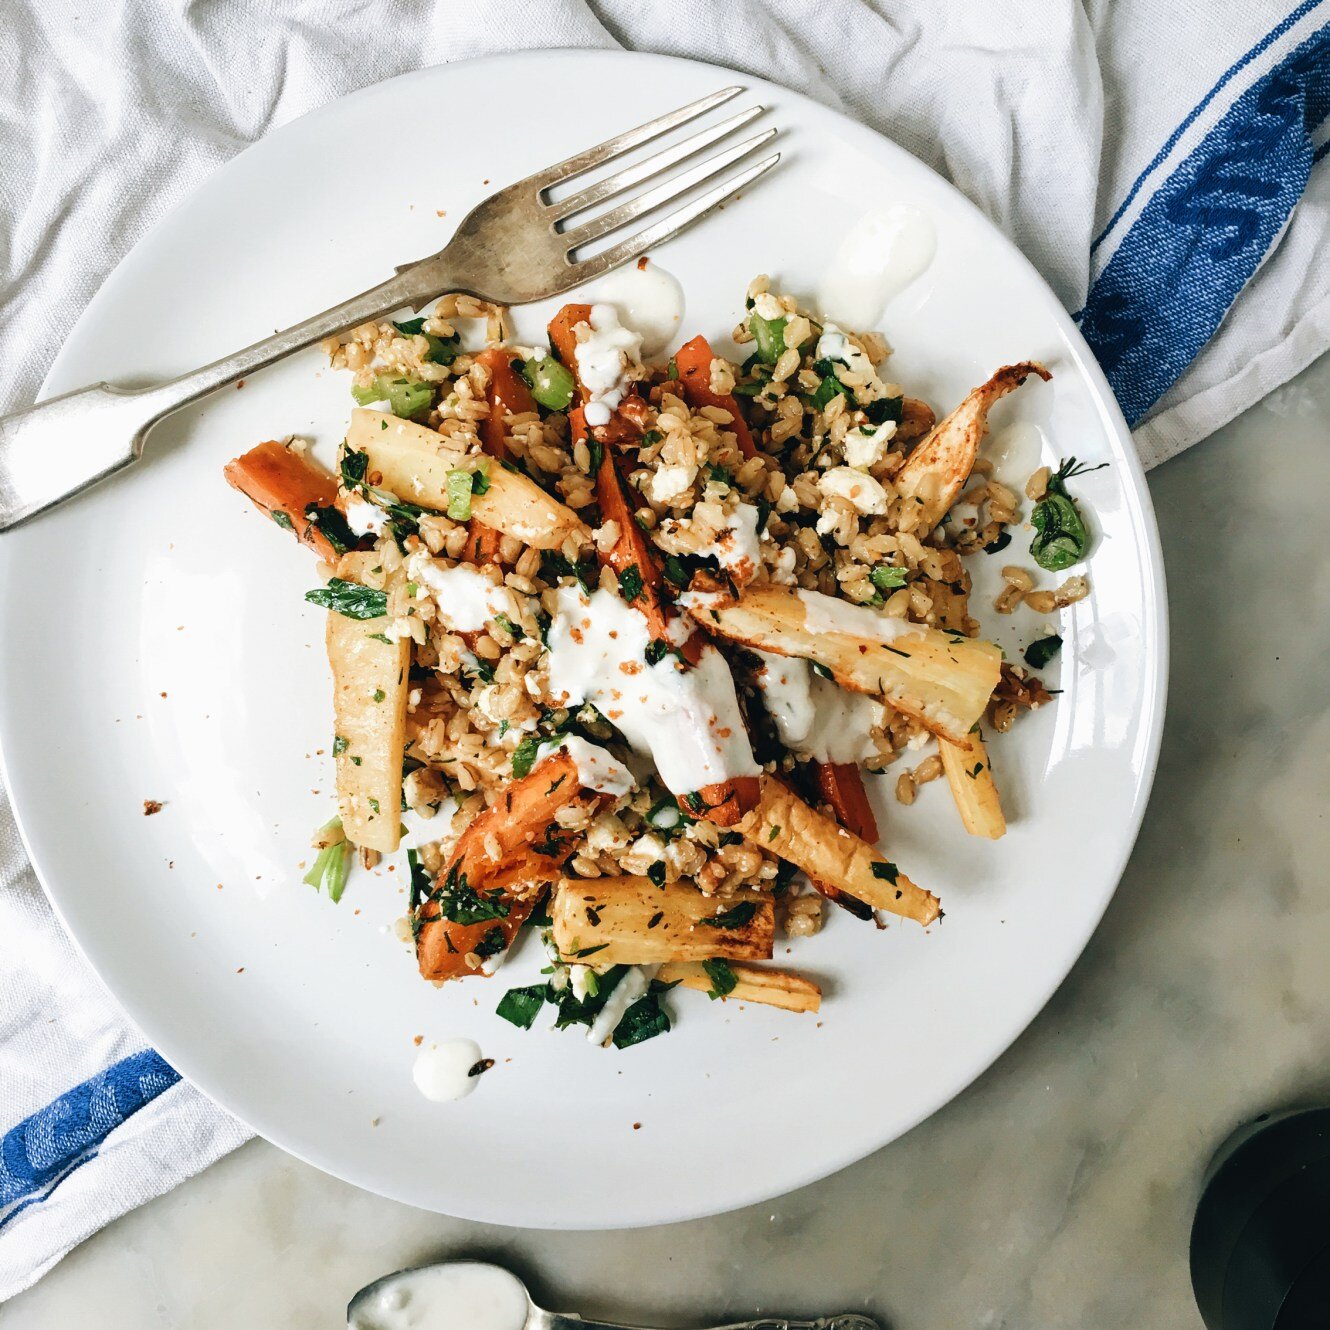 Middle Eastern Spiced Carrot and Parsnip Salad